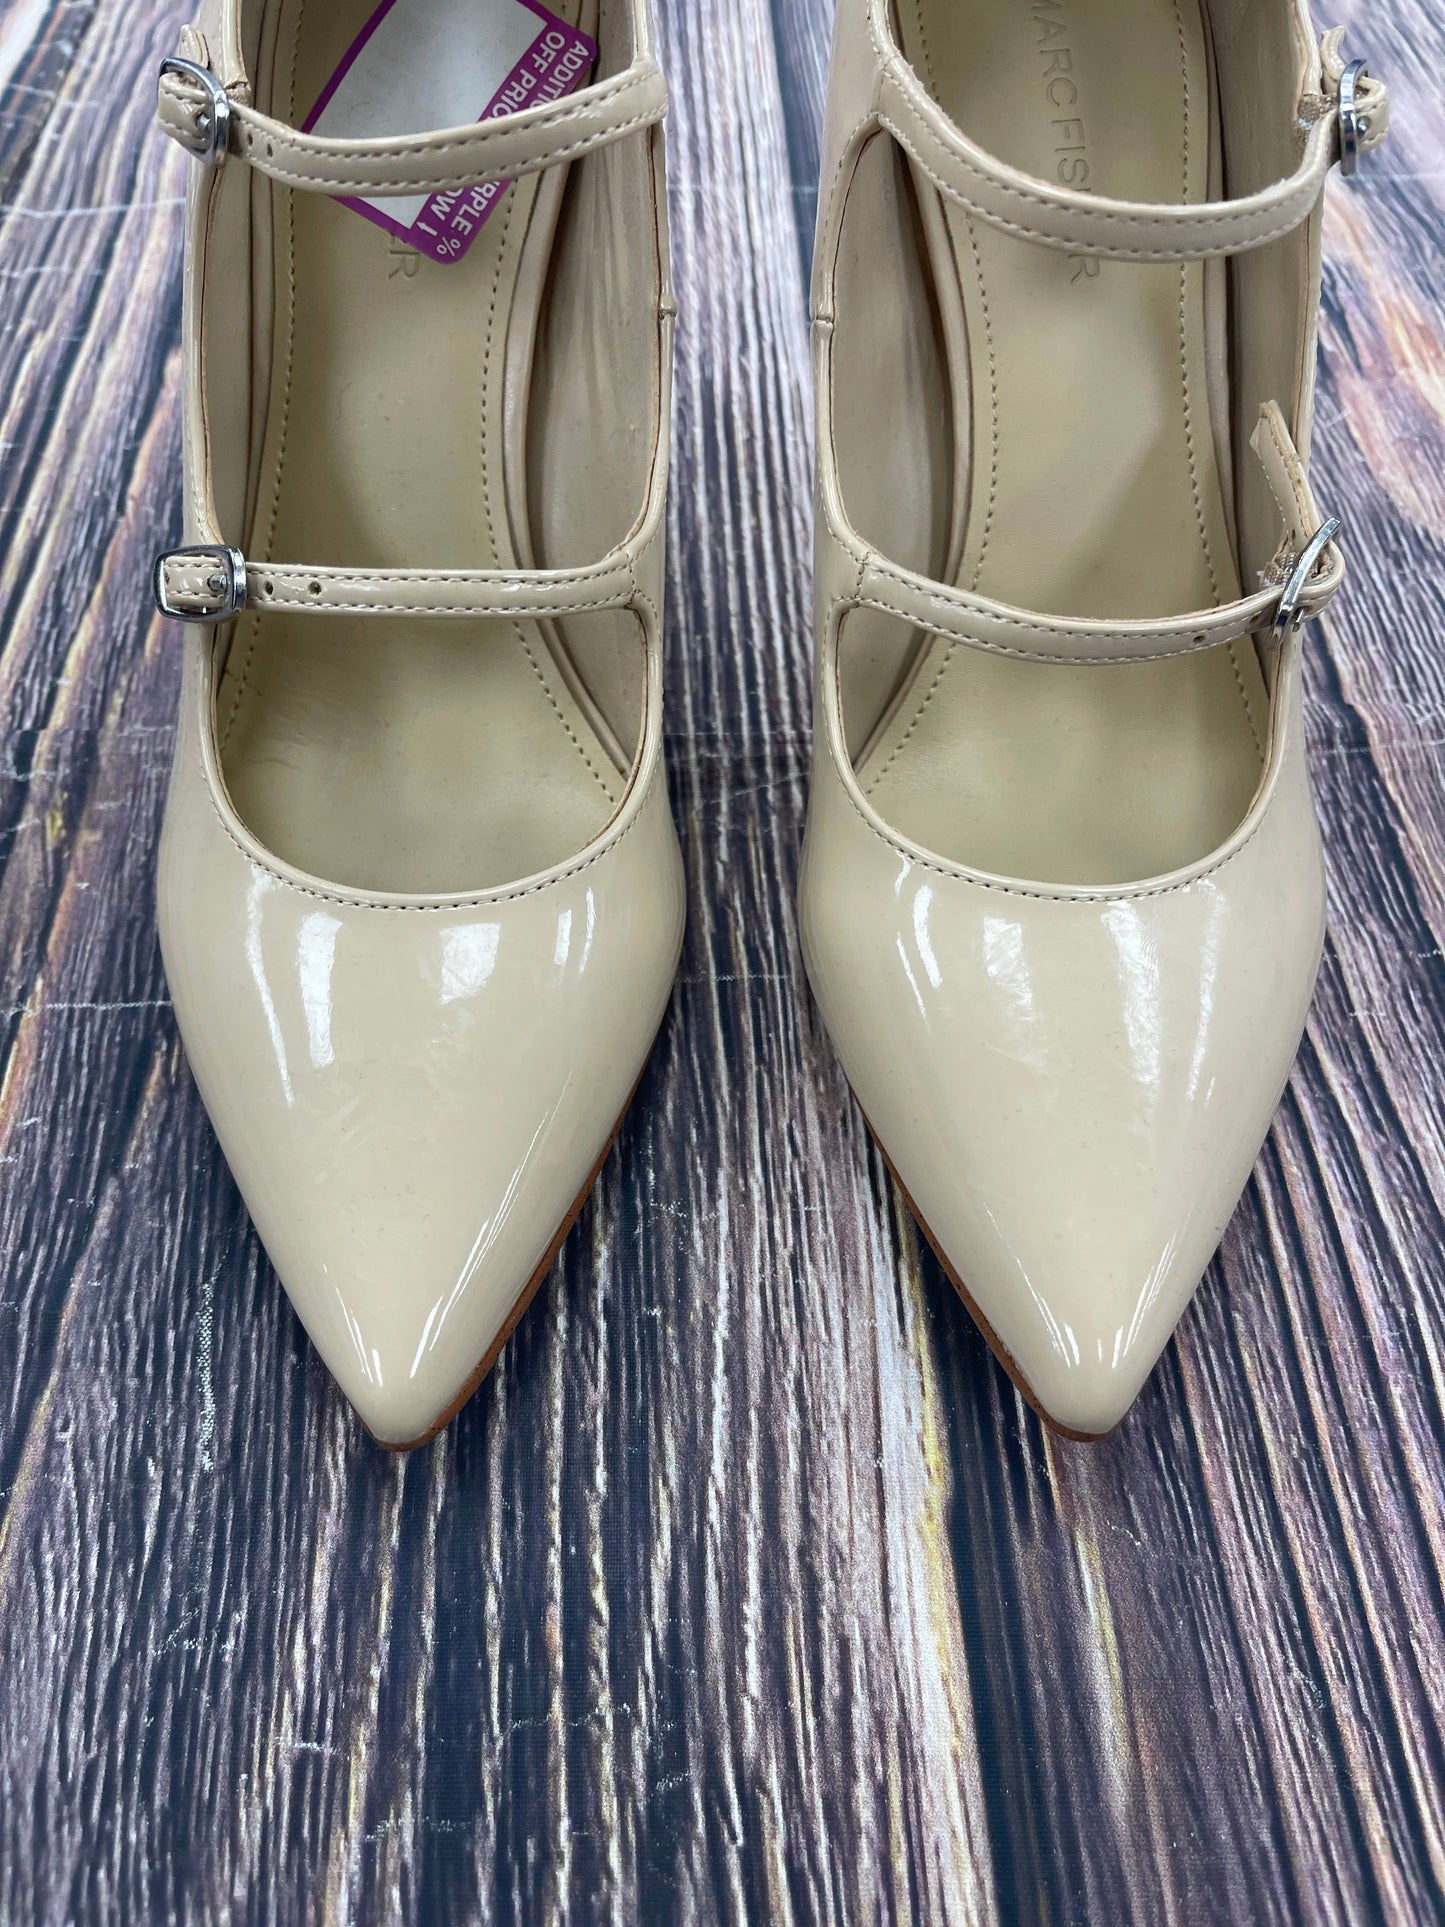 Tan Shoes Heels Stiletto Marc Fisher, Size 7.5